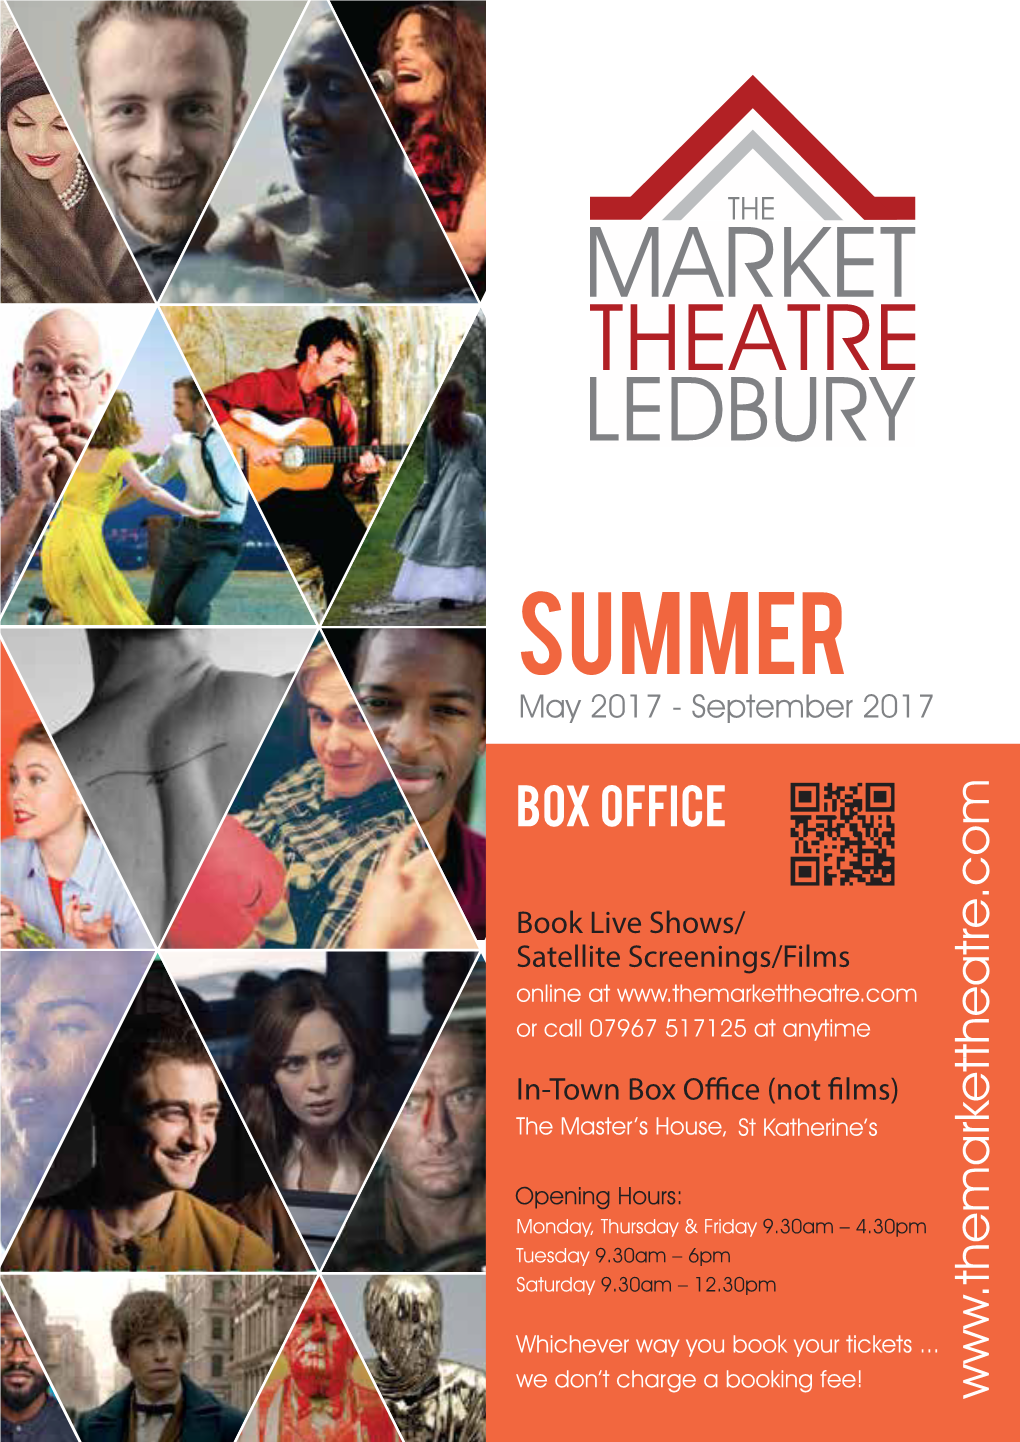 SUMMER May 2017 - September 2017 Welcome to Our Summer Season Programme!